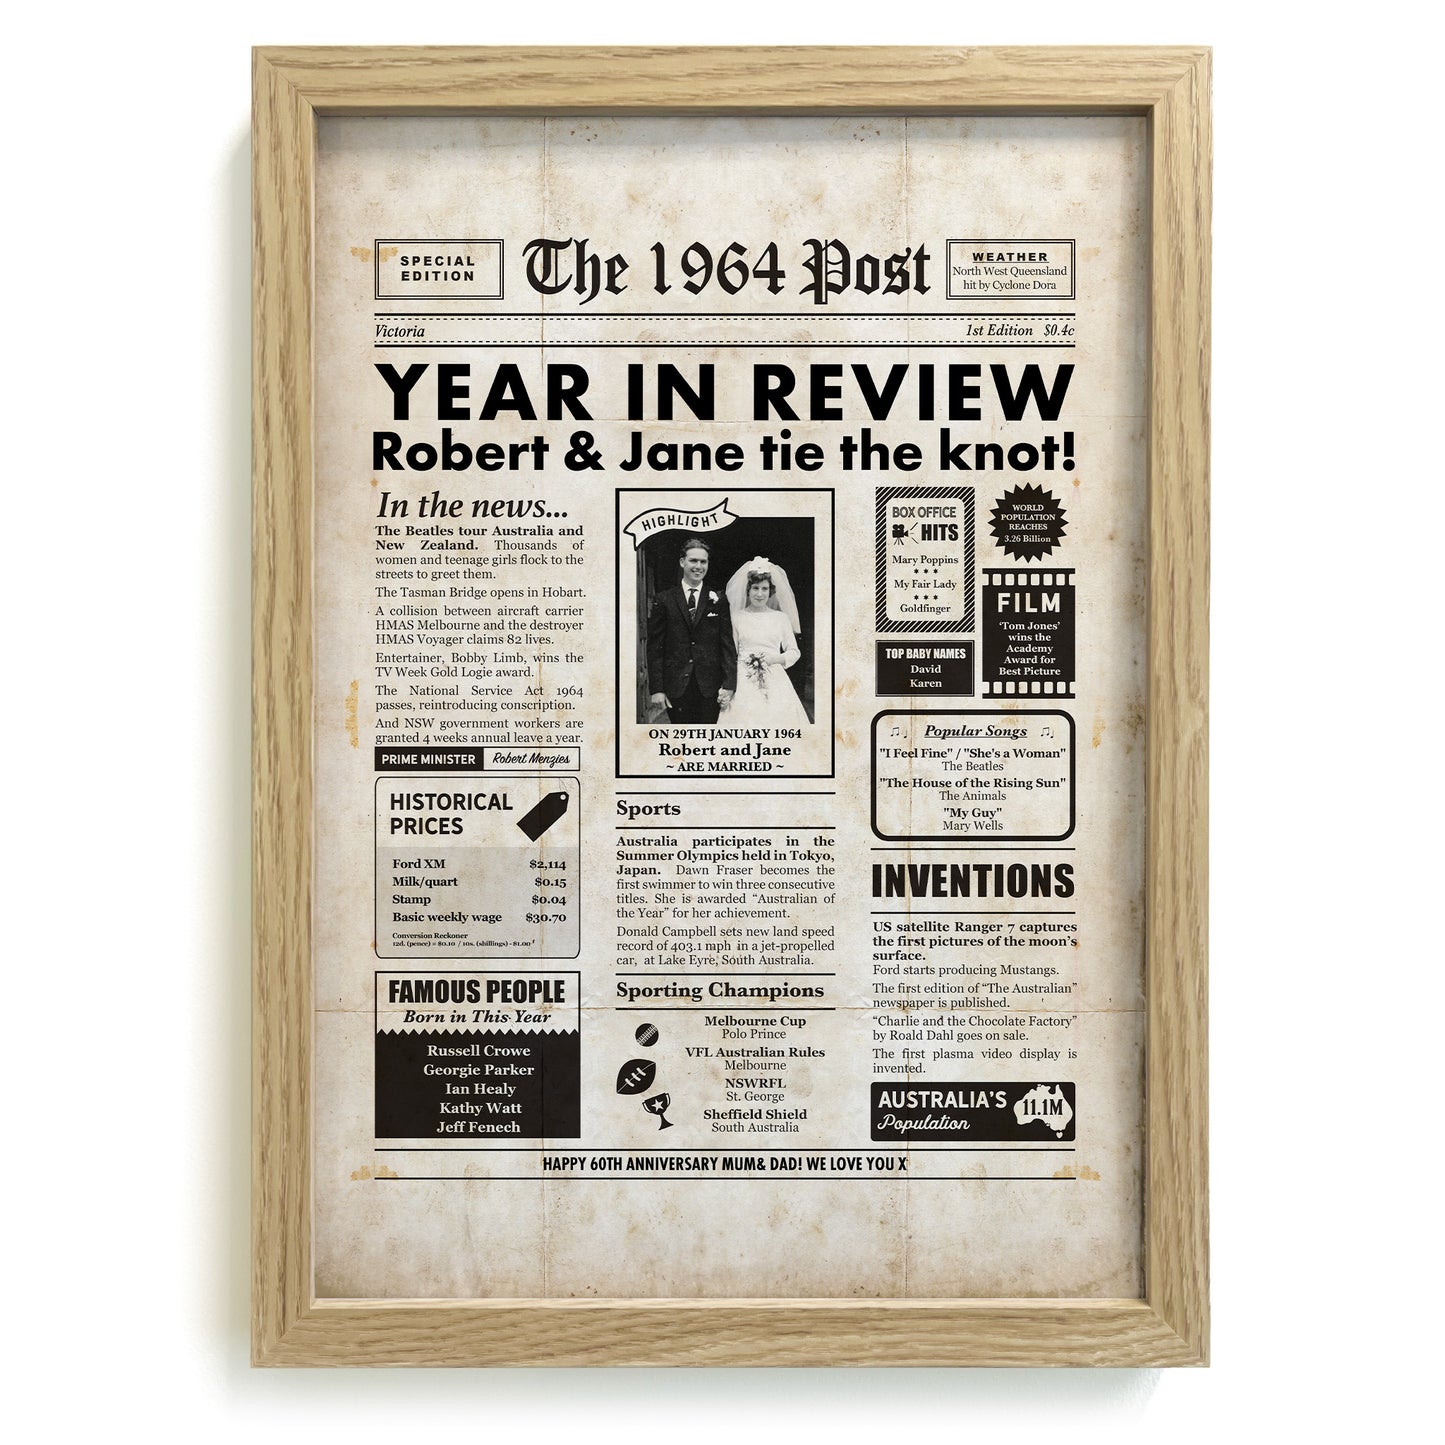 1964 Australian 60th anniversary personalised newspaper in a timber look frame